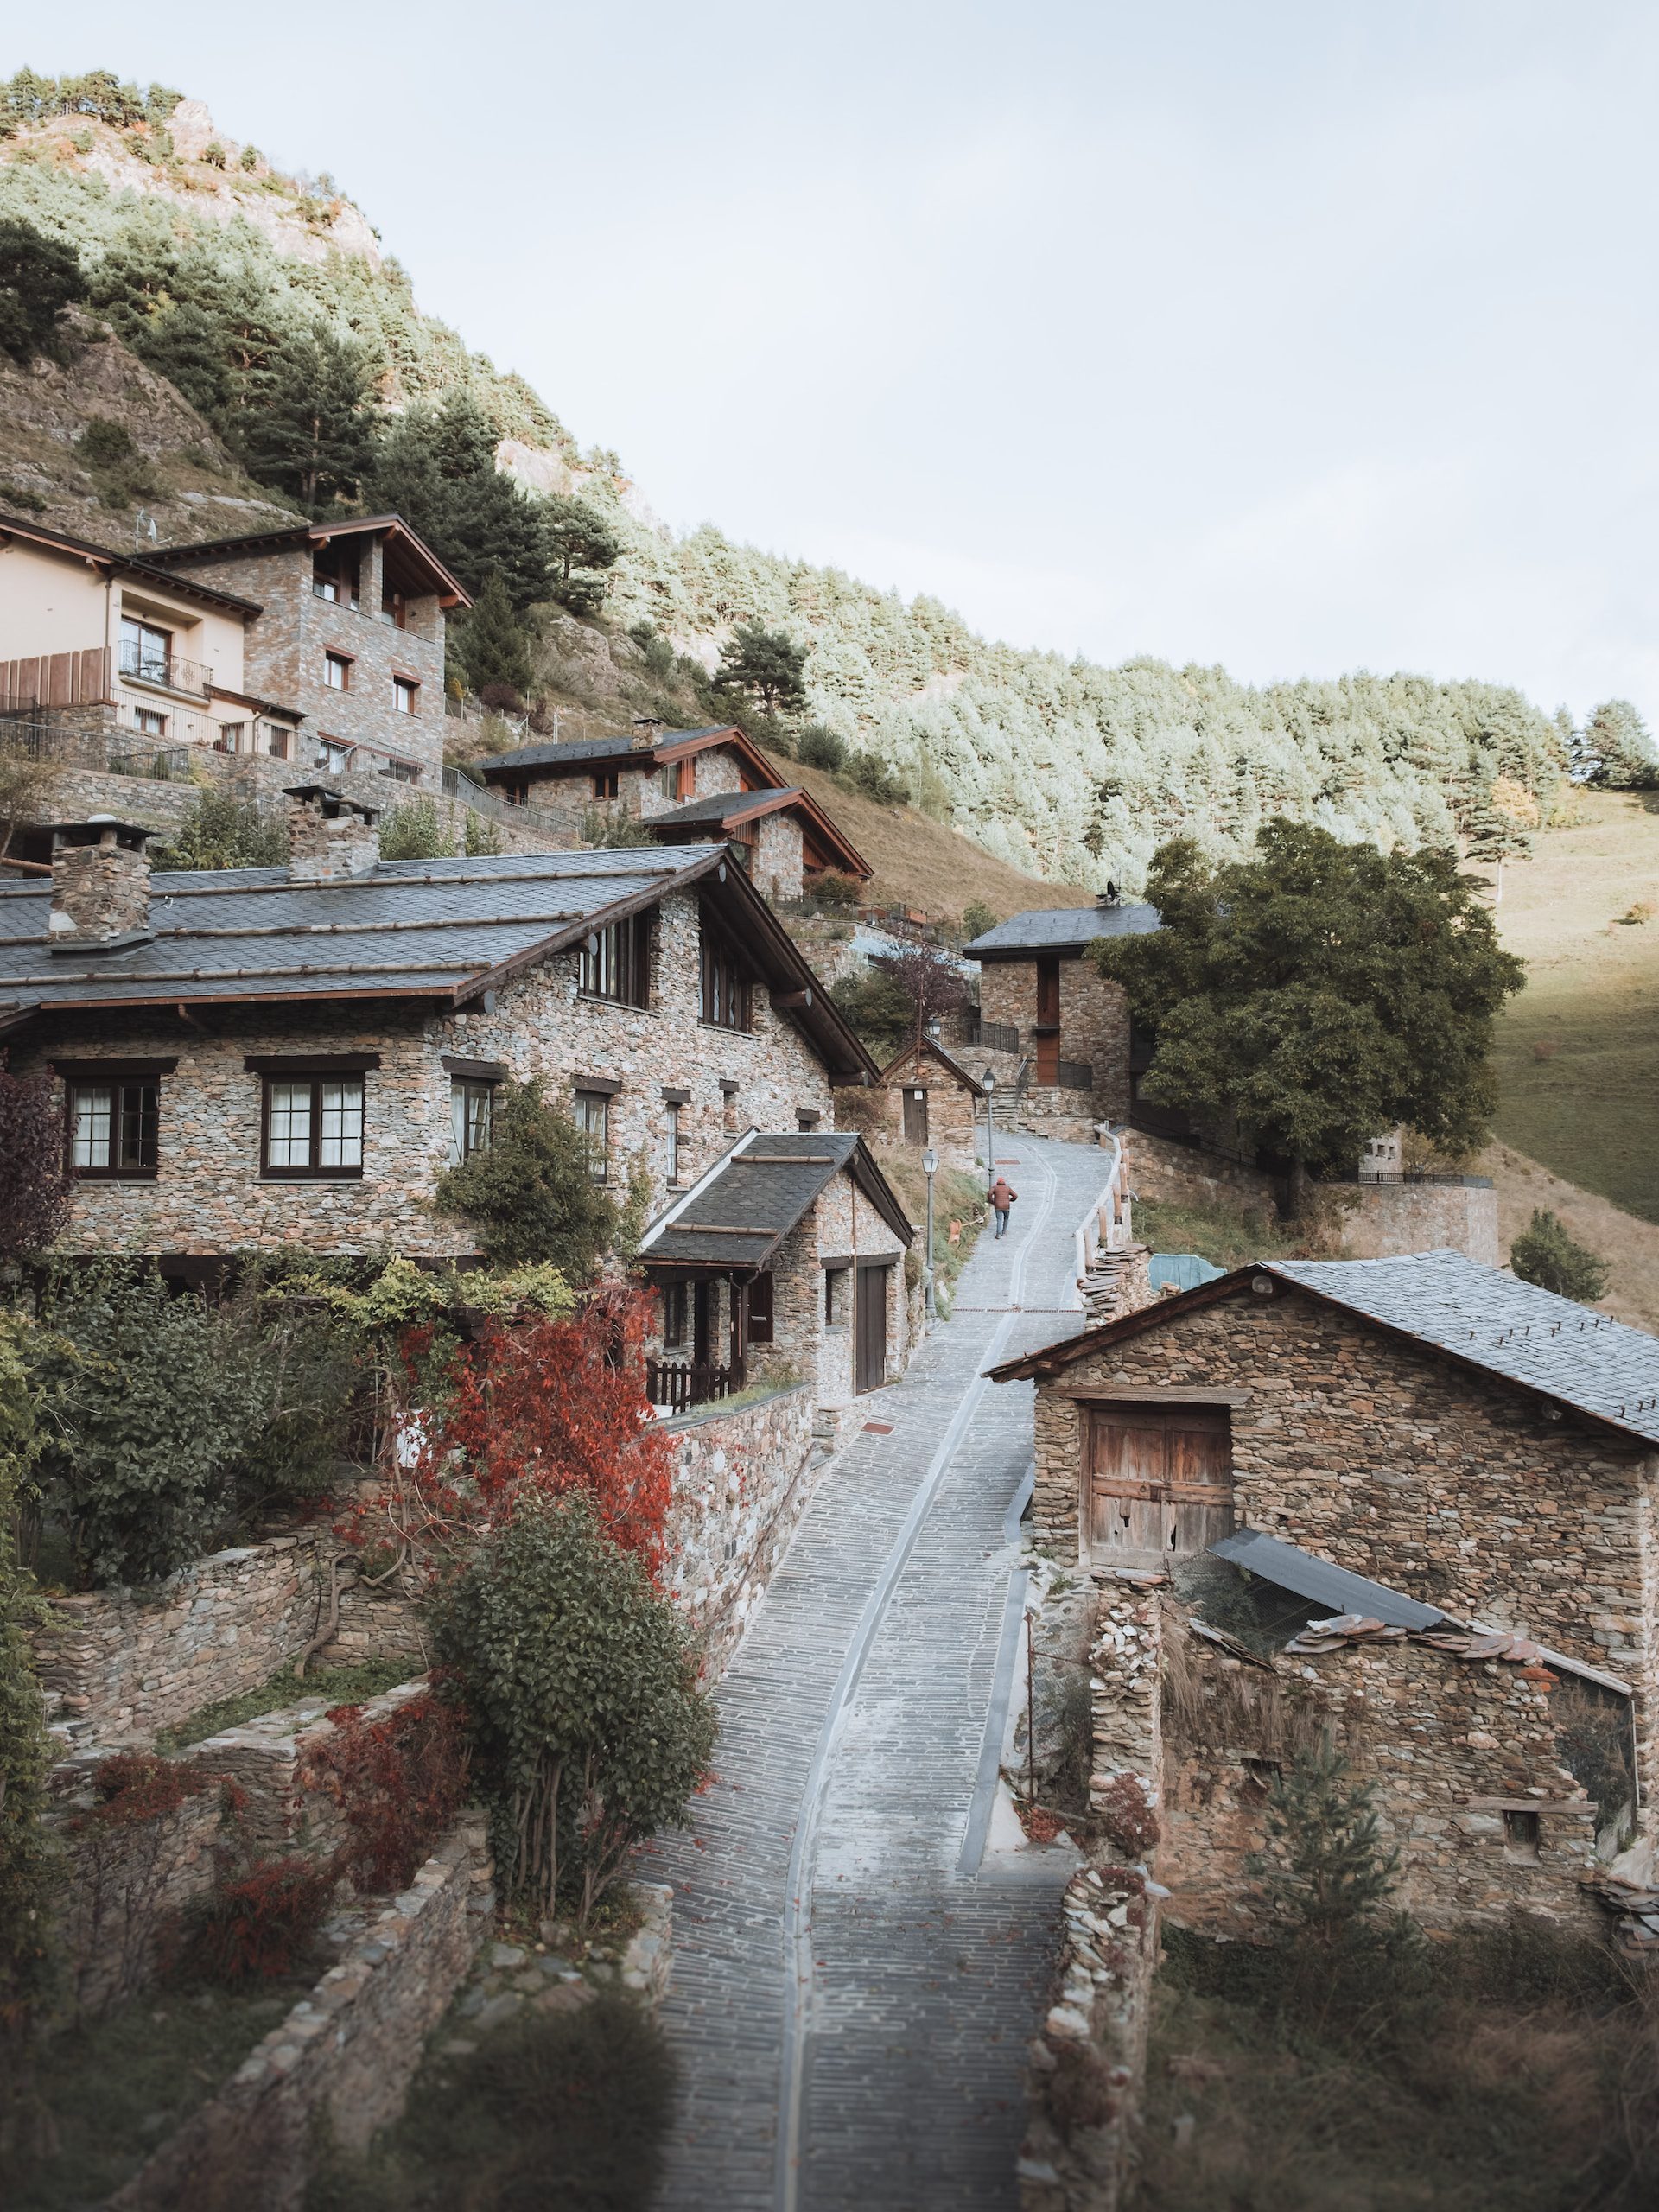 Andorra Digital Nomad Visa is Now Available!